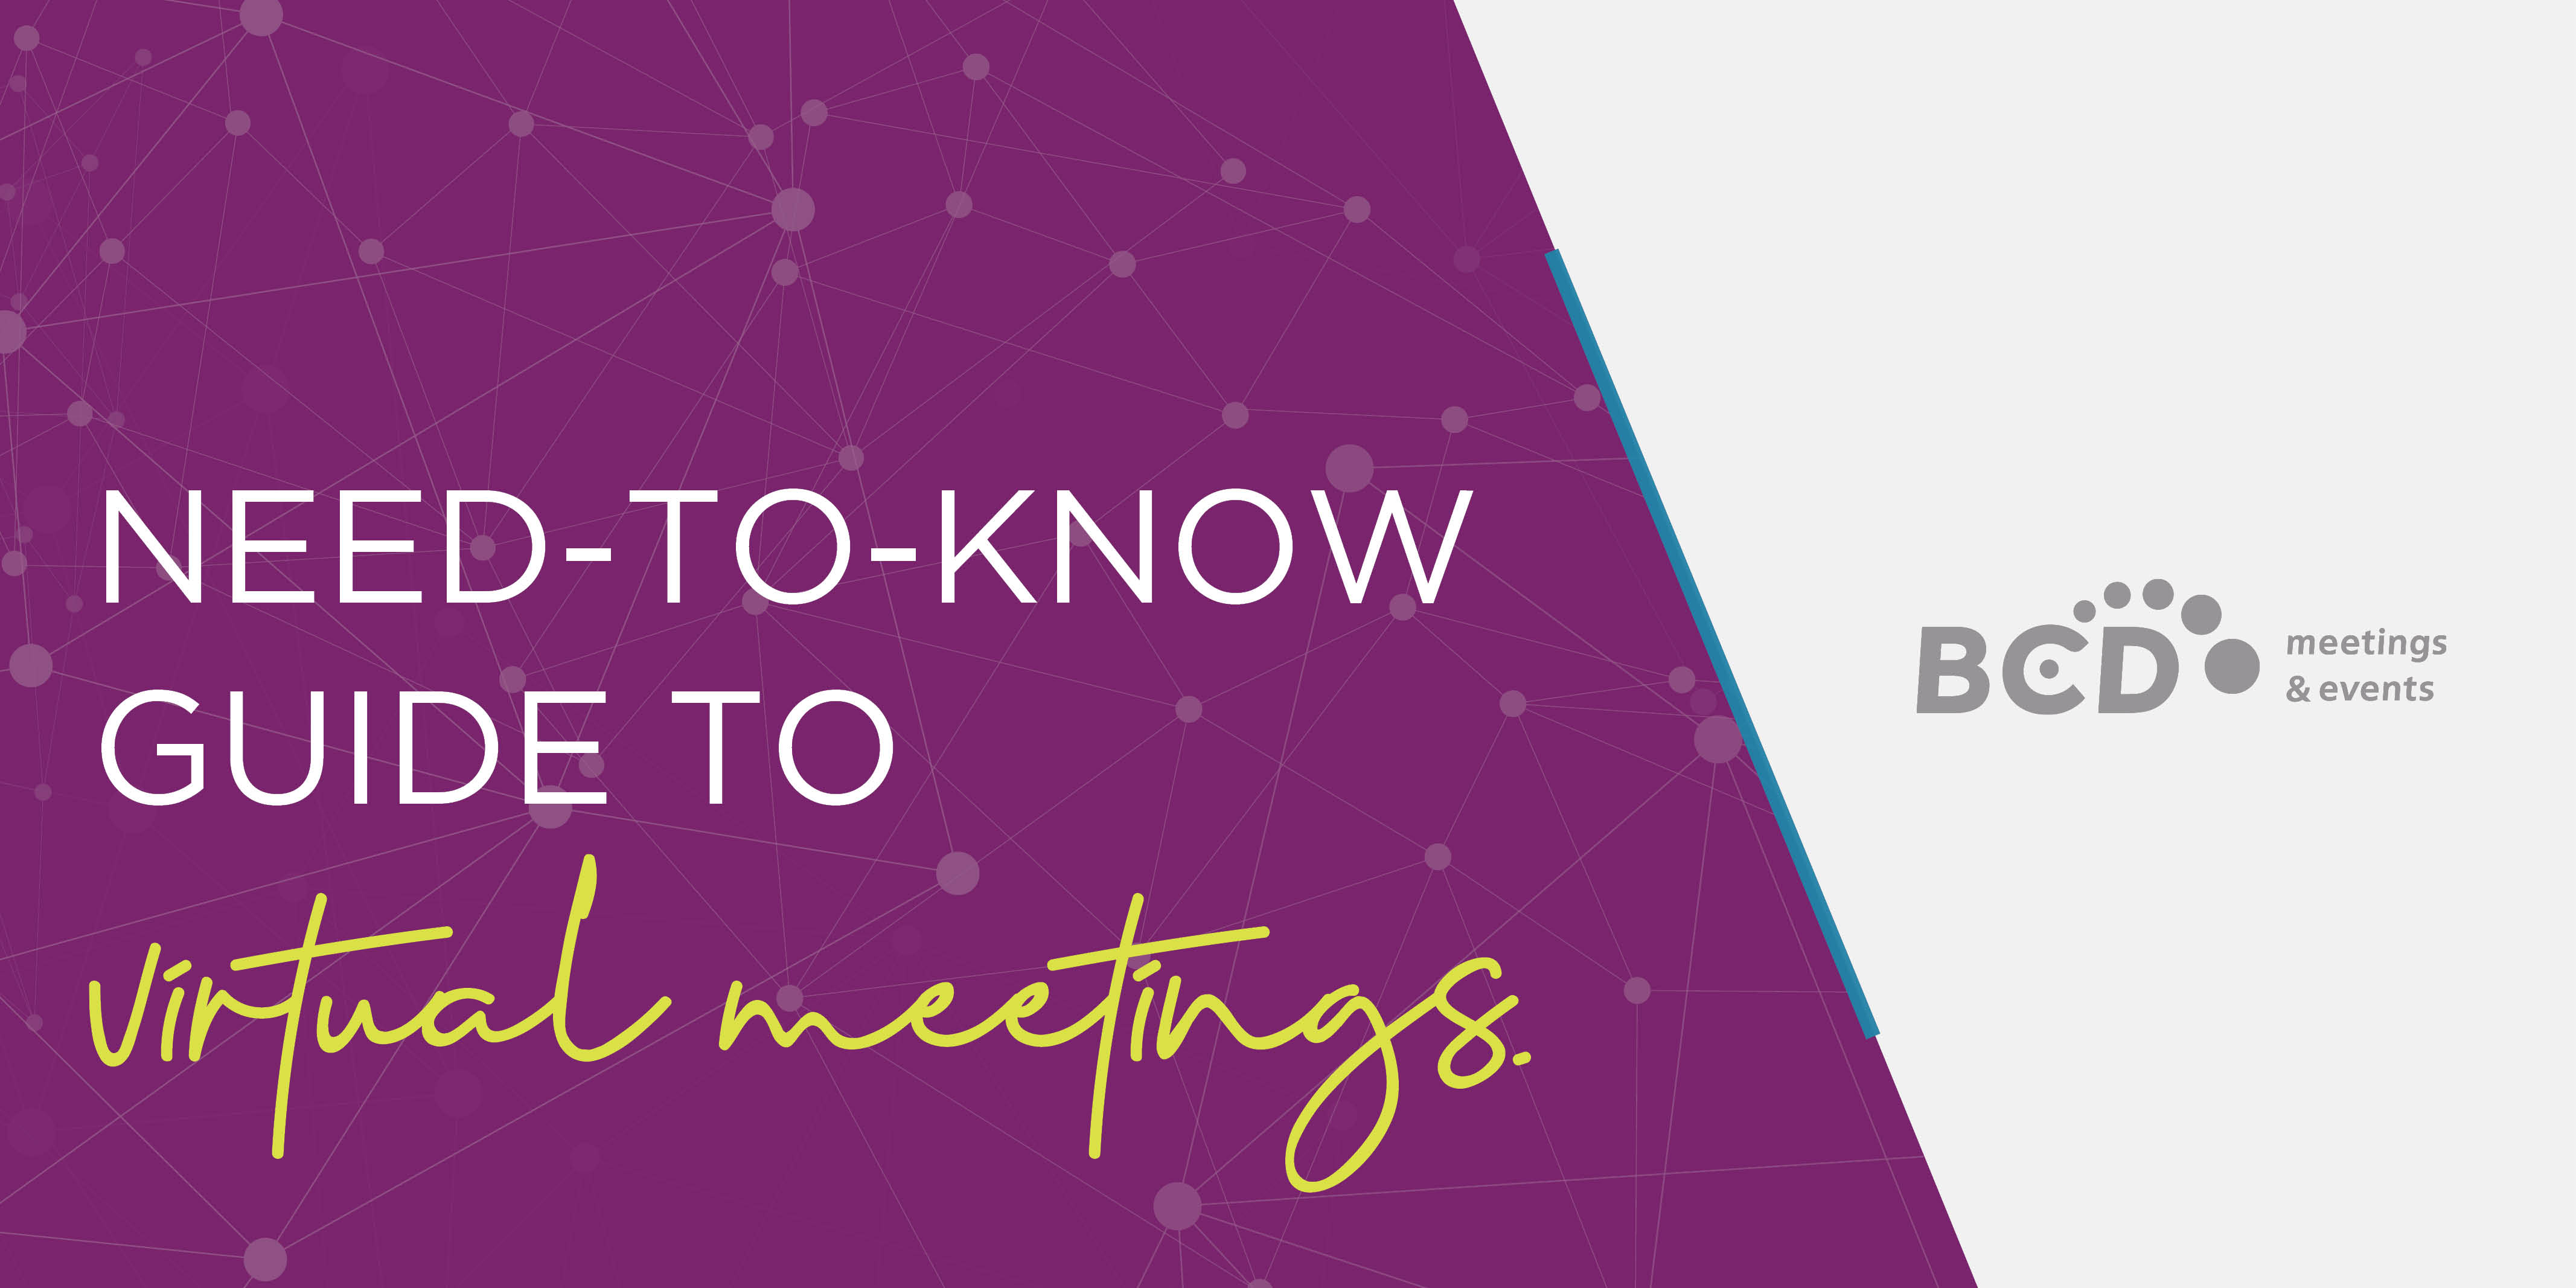 Graphic for Need-to-Know Guide to Virtual Meetings by BCD Meetings & Events